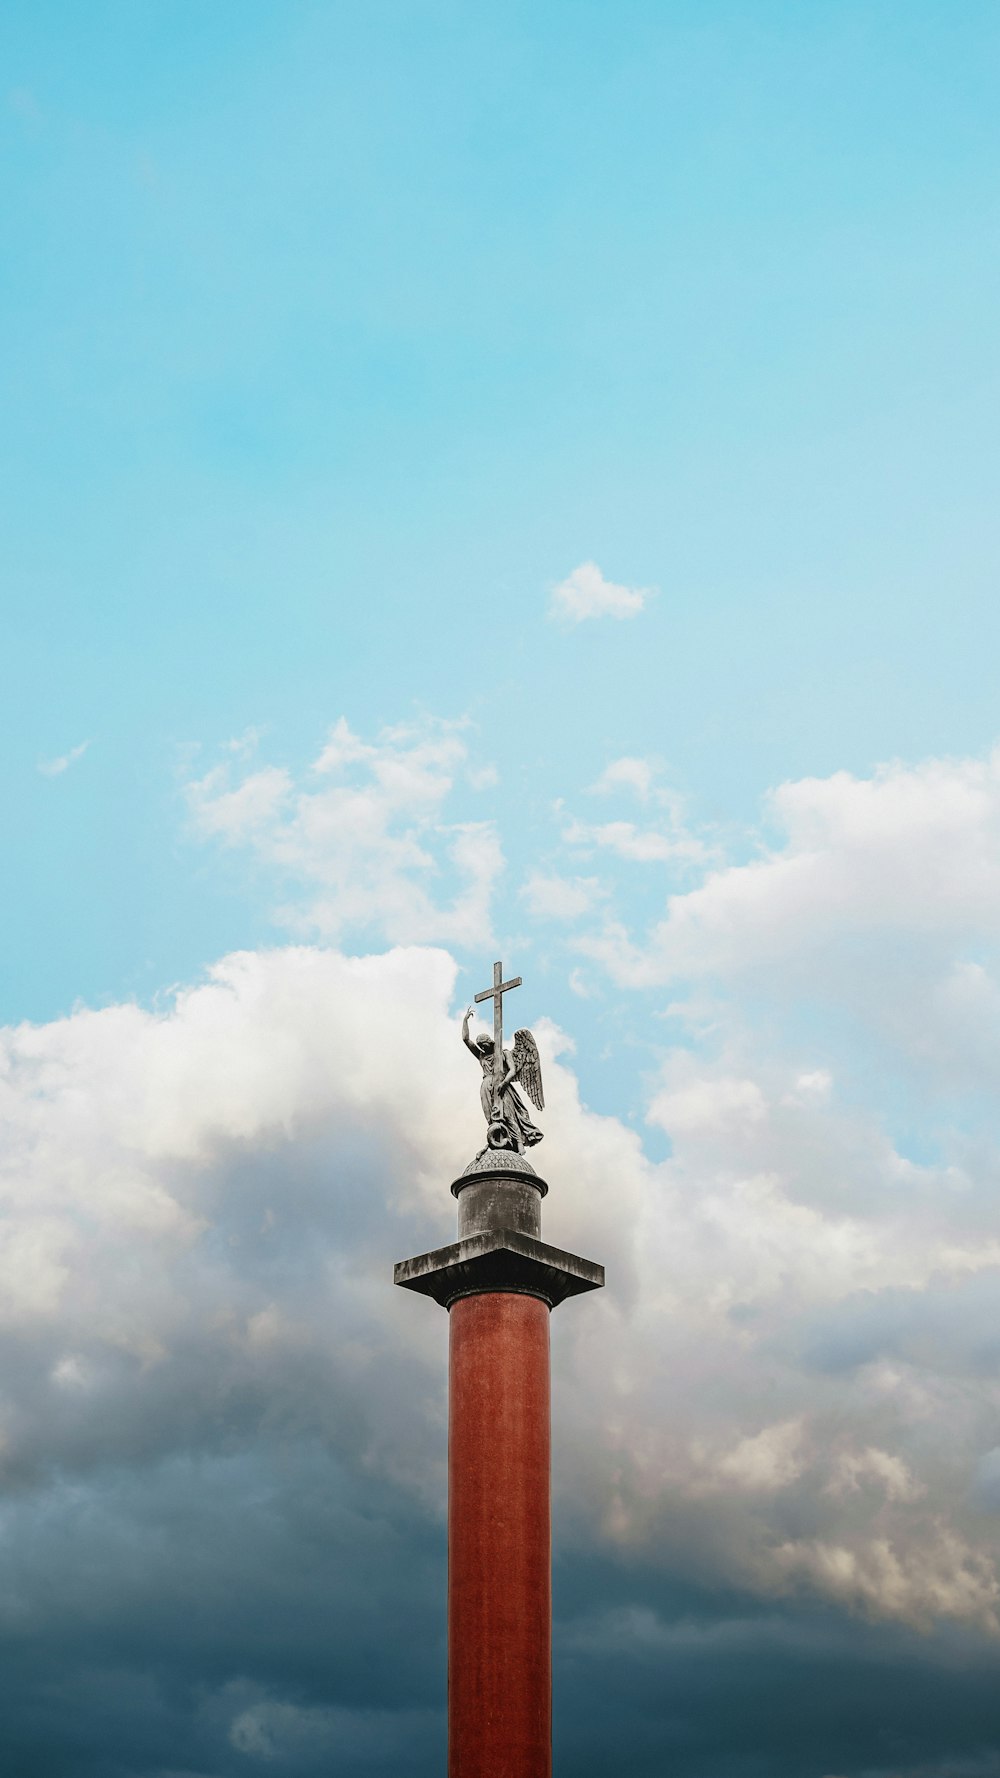 a statue on top of a tall red pillar